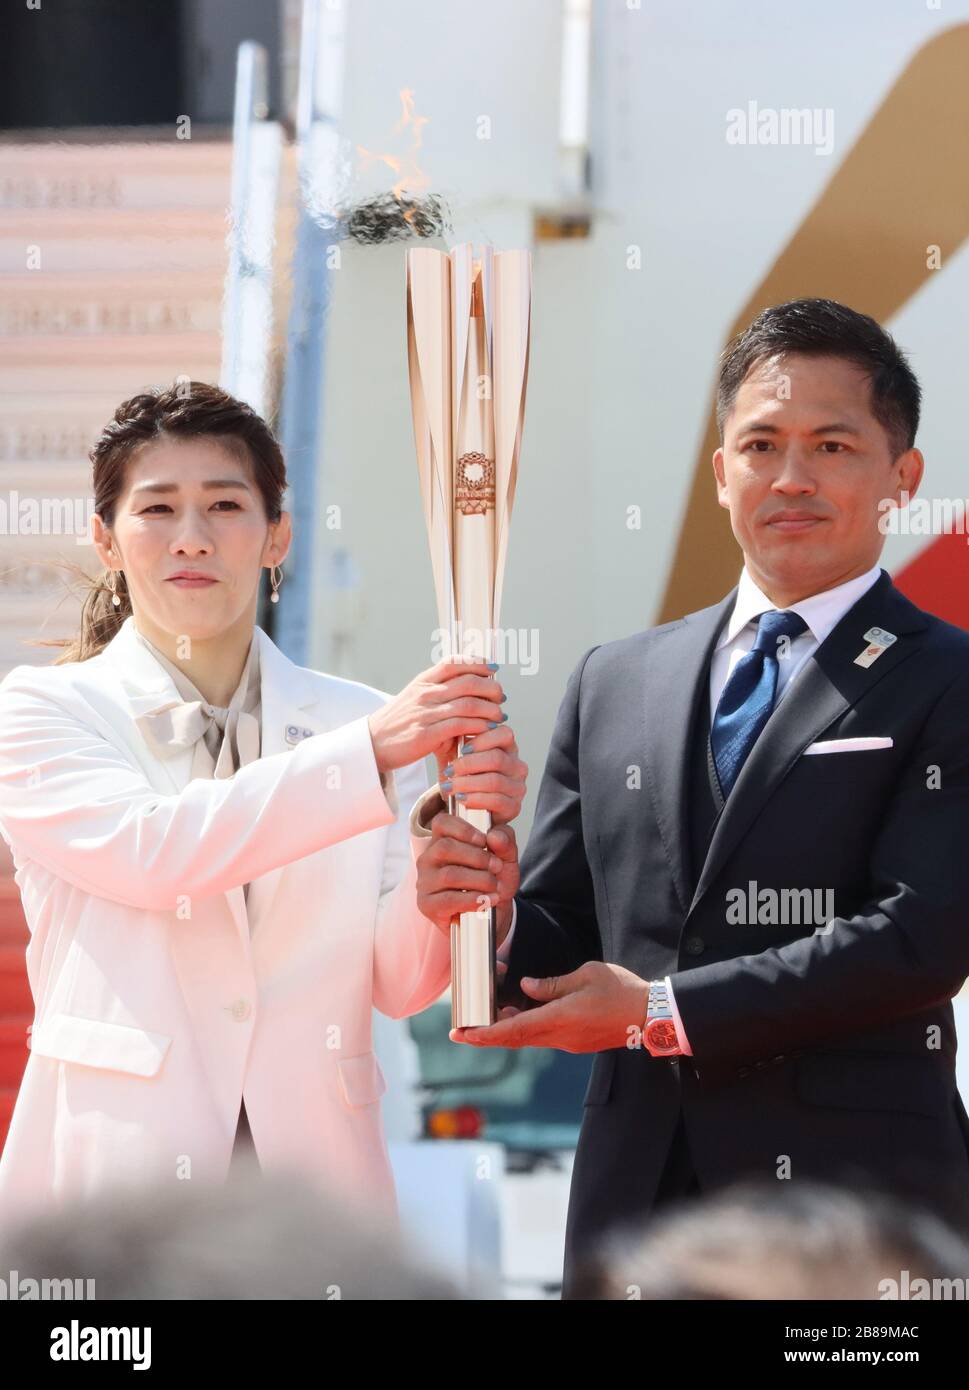 Higashi Matsushima, Japan. 20th Mar, 2020. Olympic gold medalists Saori Yoshida (L) of wrestling and Tadahiro Nomura (R) of judo hold a torch as they attend the arrival ceremony for the Olympic flame at the Matsushima air base in Higashi Matsushima in Miyagi prefecture, northern Japan on Friday, March 20, 2020. Tokyo 2020 Olympic Games will start from March 26 at Fukushima prefecture. Credit: Yoshio Tsunoda/AFLO/Alamy Live News Stock Photo